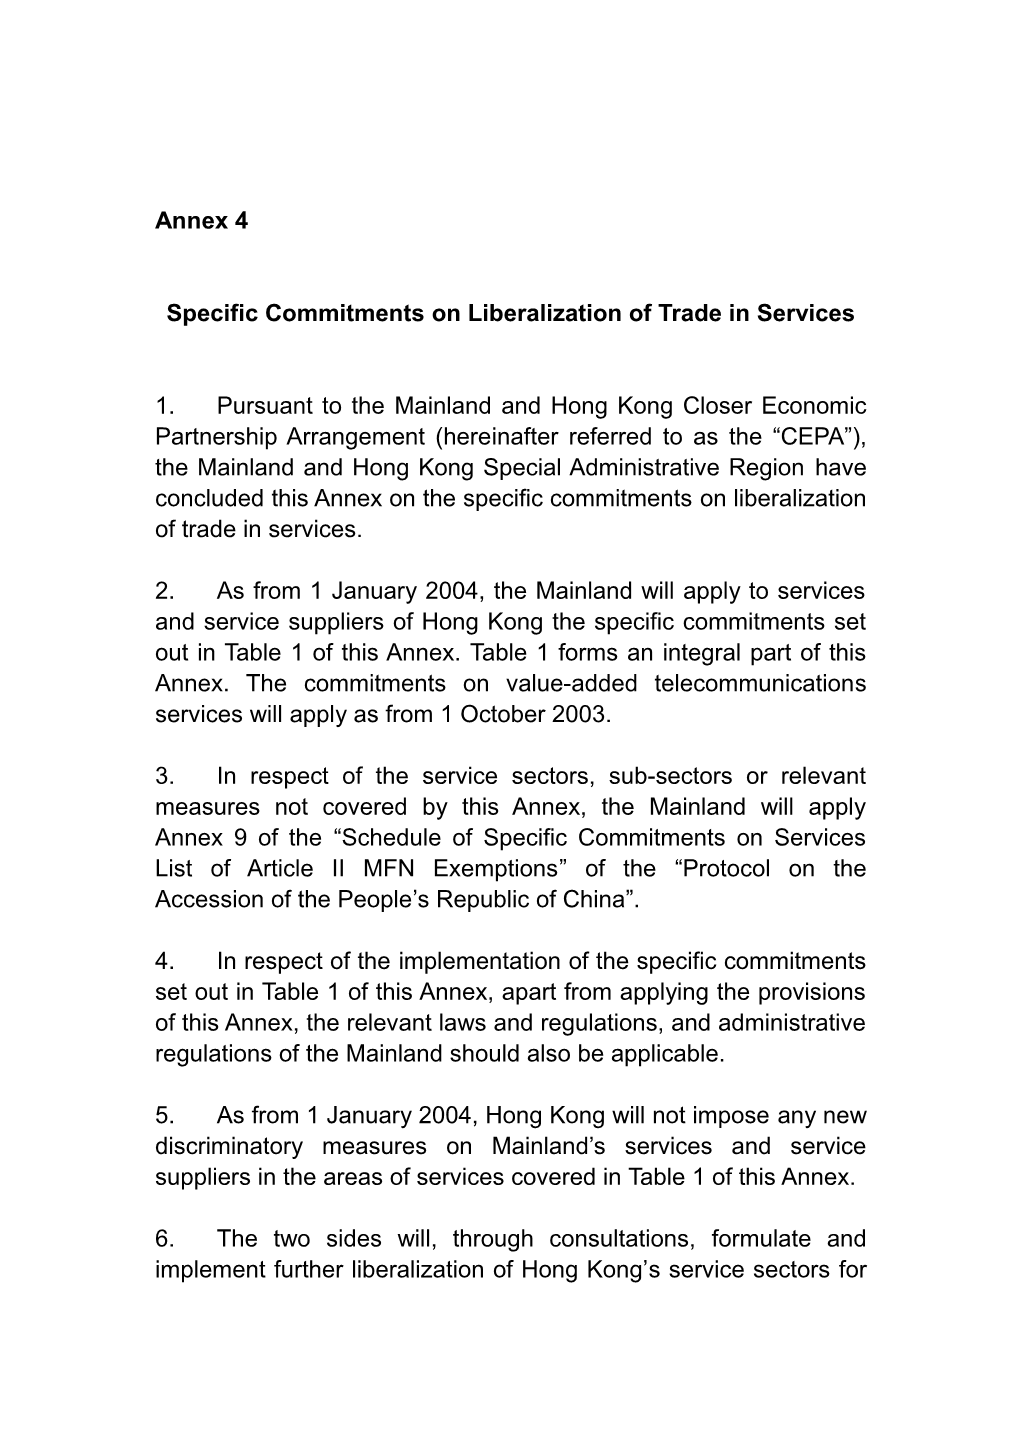 Specific Commitments Onliberalization of Trade in Services